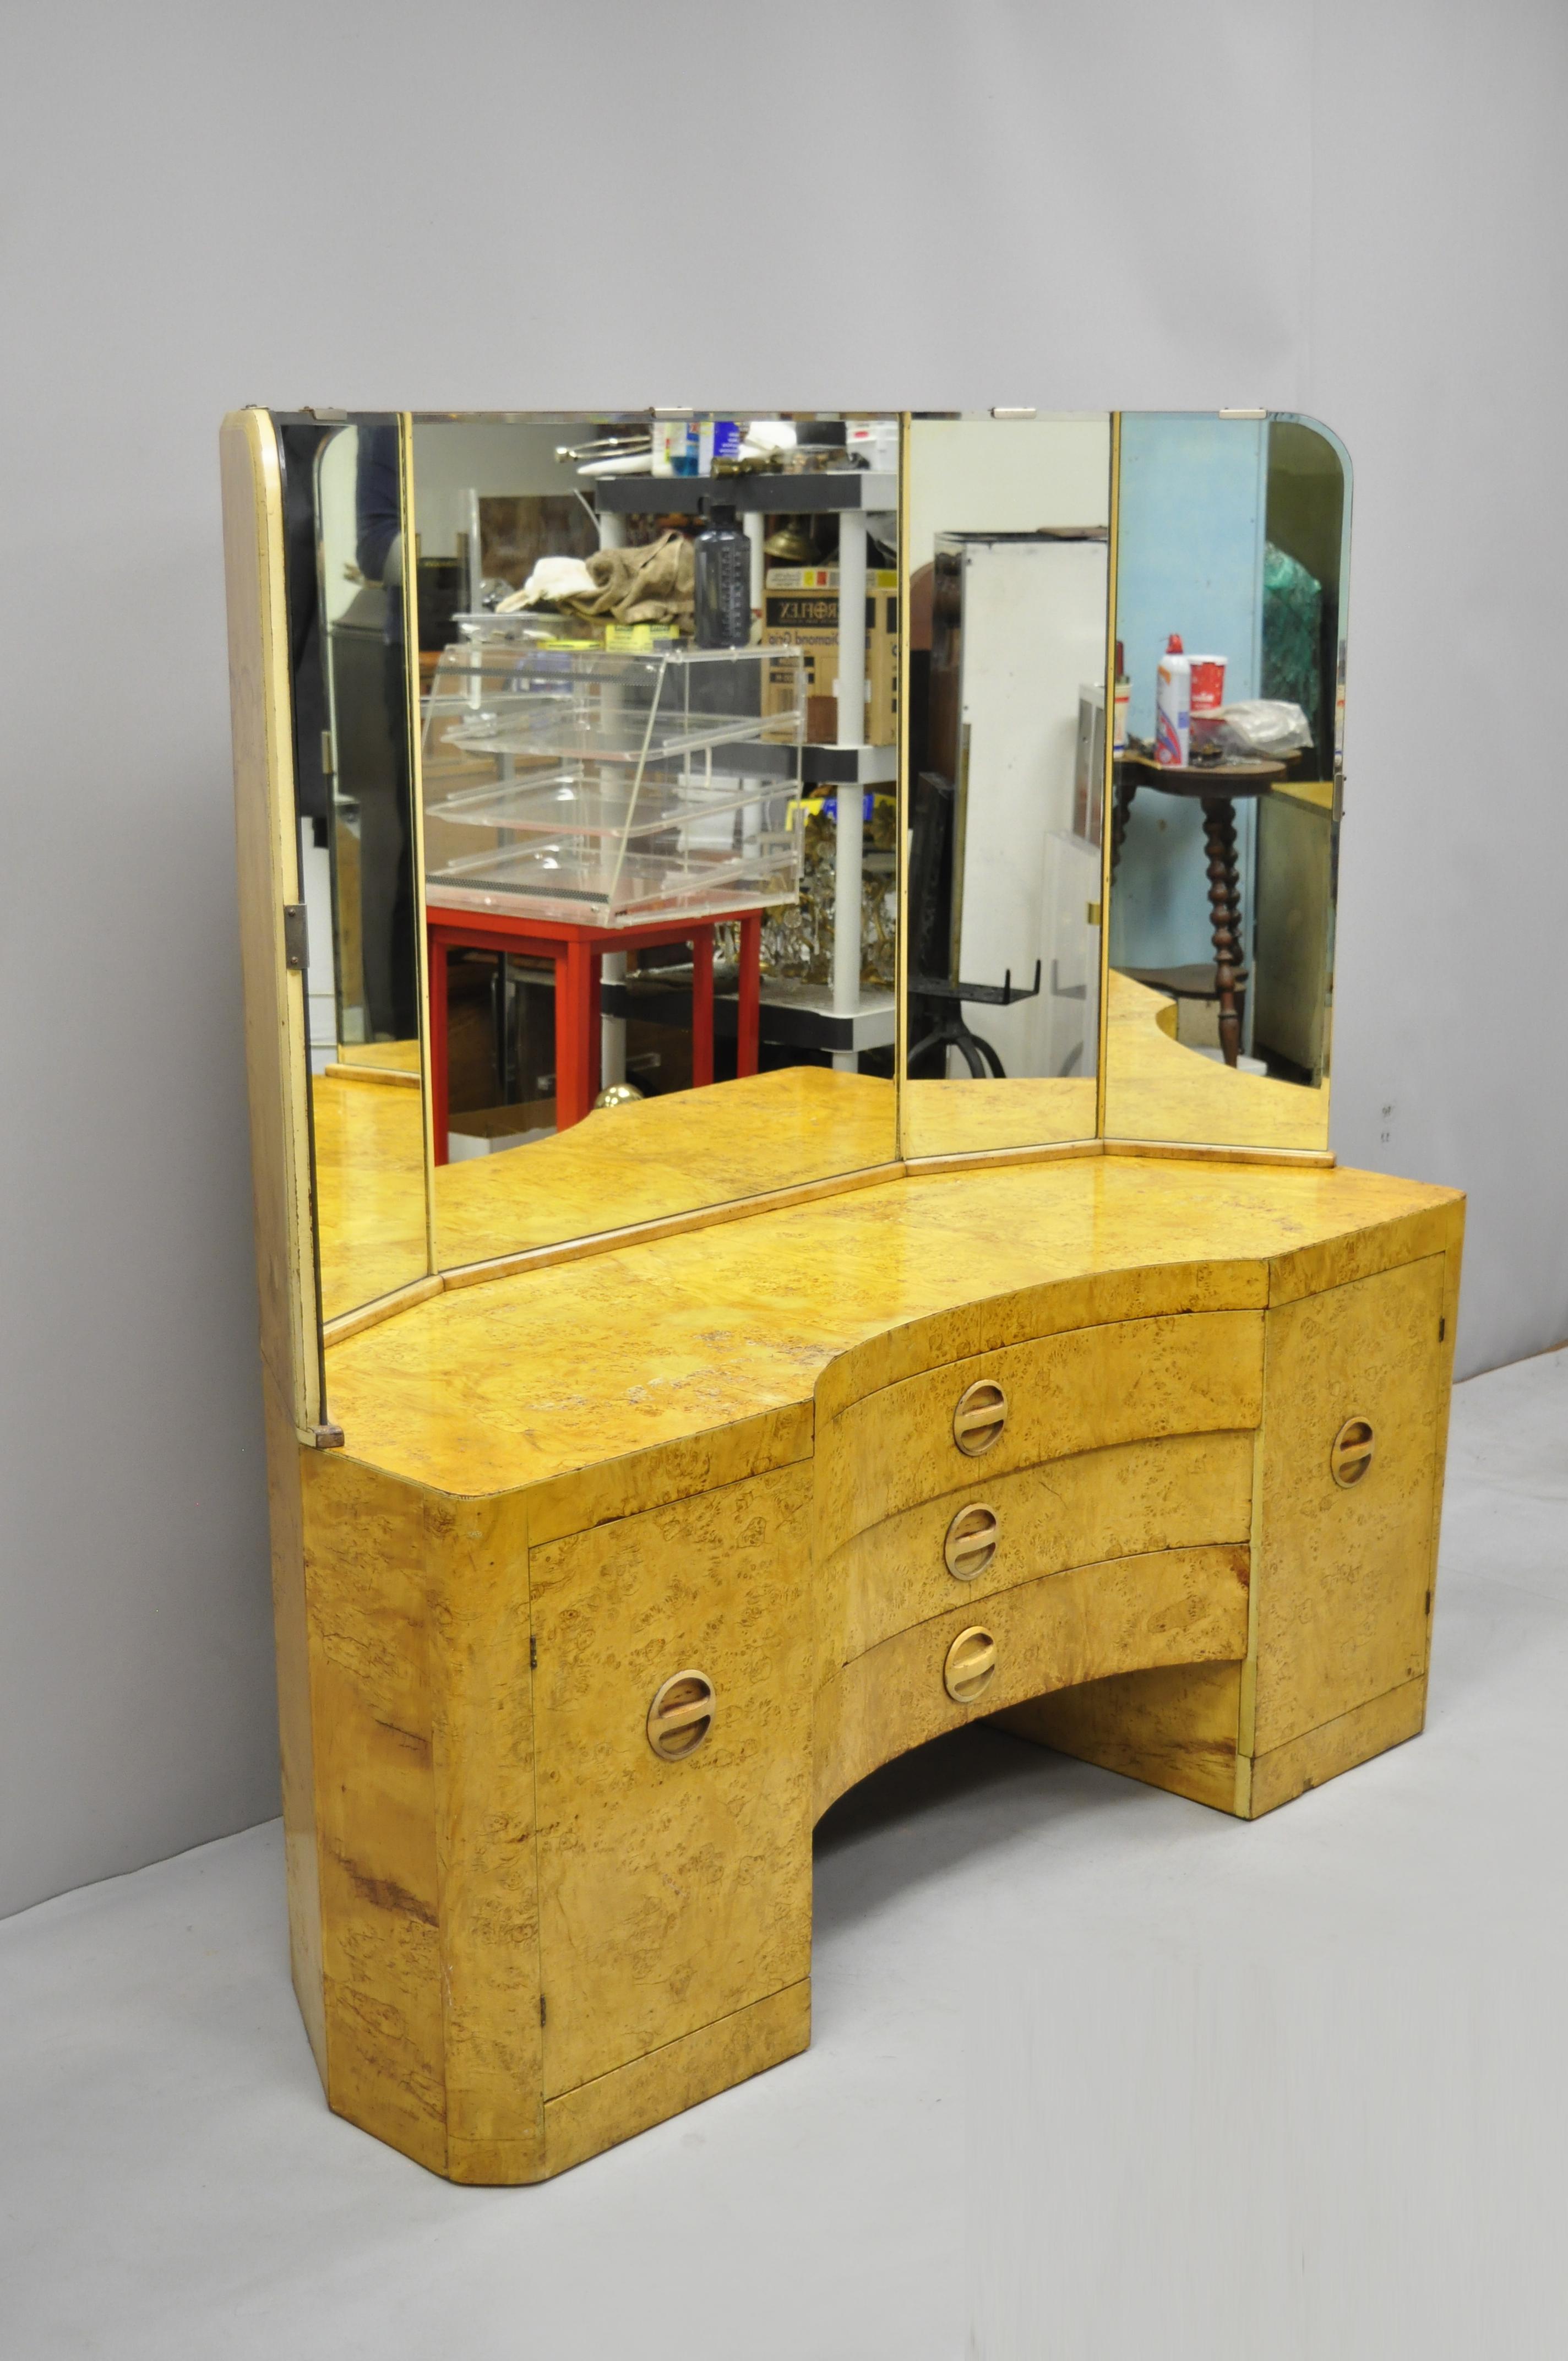 Antique Art Deco bird's-eye maple vanity with 5-panel mirror after Gilbert Rohde. Item features carved wood pulls, 5-panel vanity mirror, beautiful wood grain, 2 swing doors, and 3 dovetailed drawers; a very vintage item, circa 1940. Measurements: